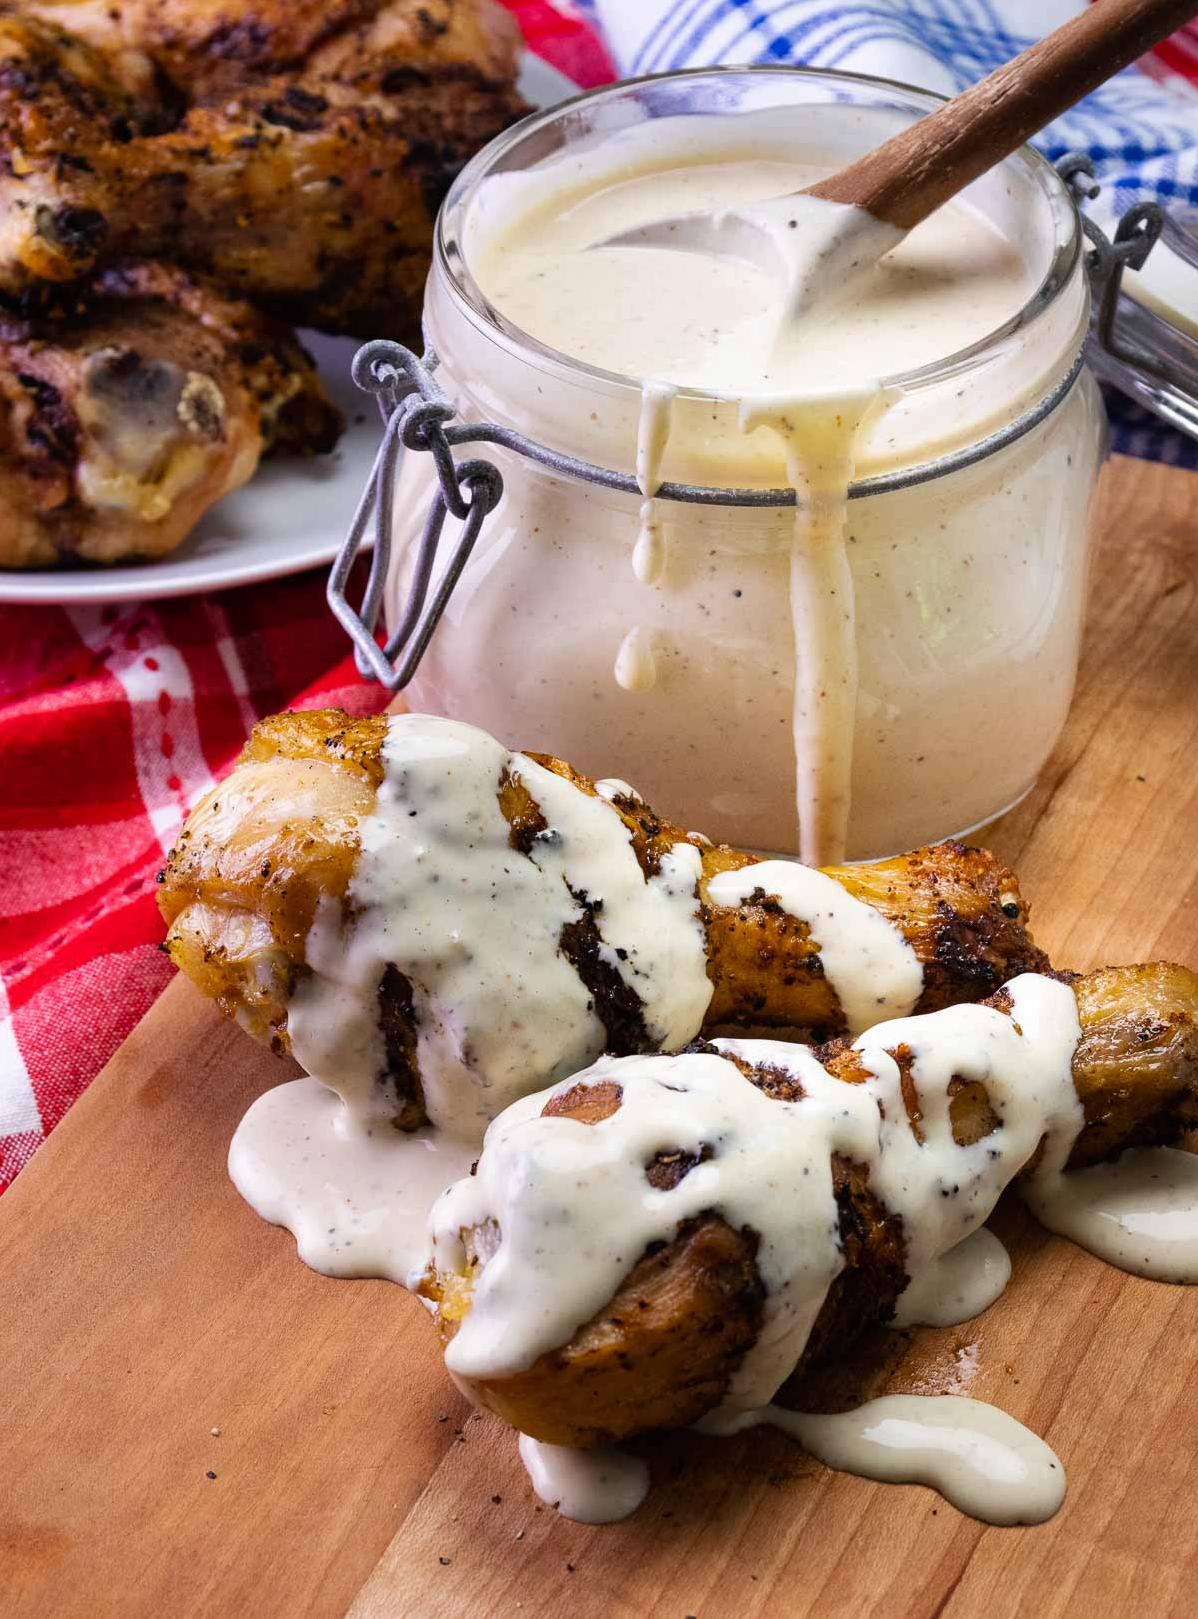  Tangy and bright, white BBQ sauce adds a zesty kick to any dish.